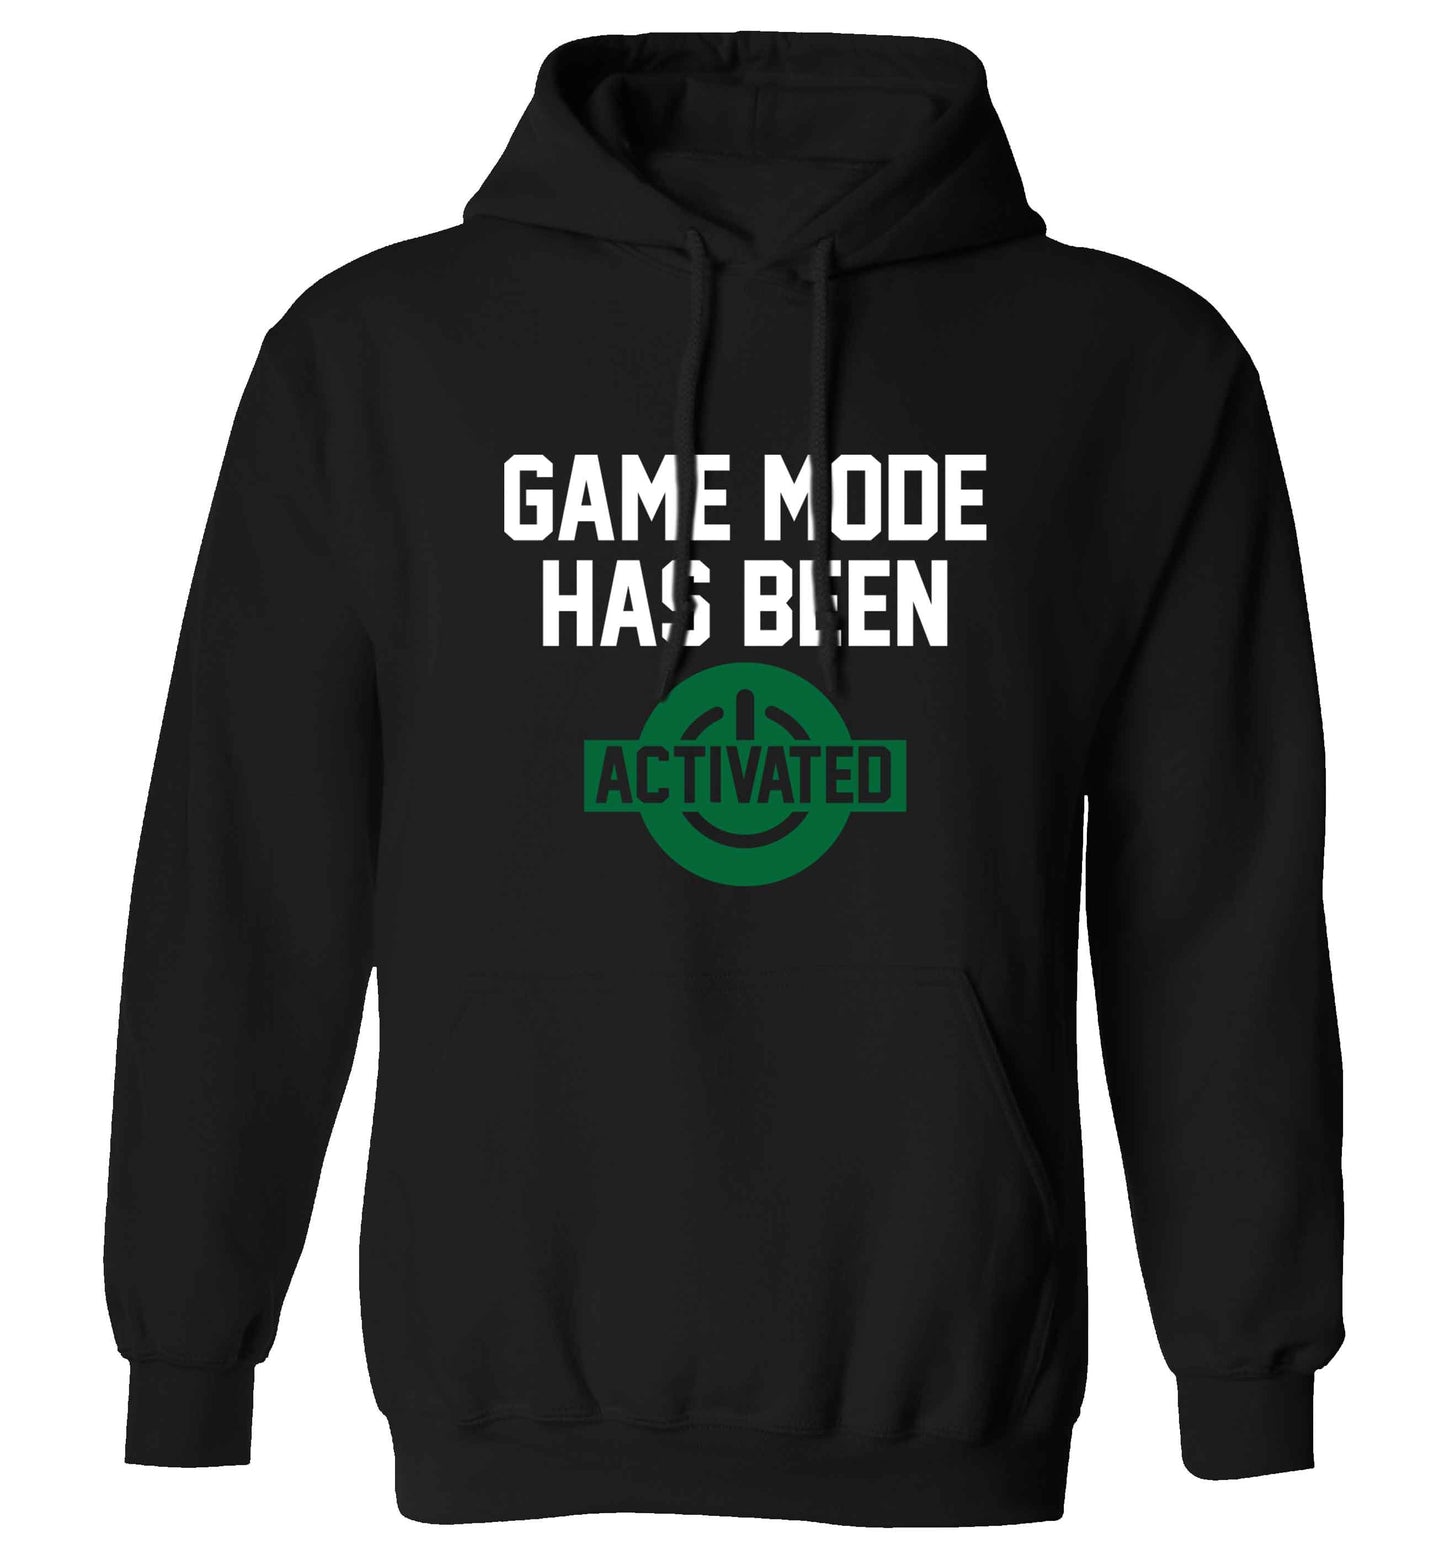 Game mode has been activated adults unisex black hoodie 2XL